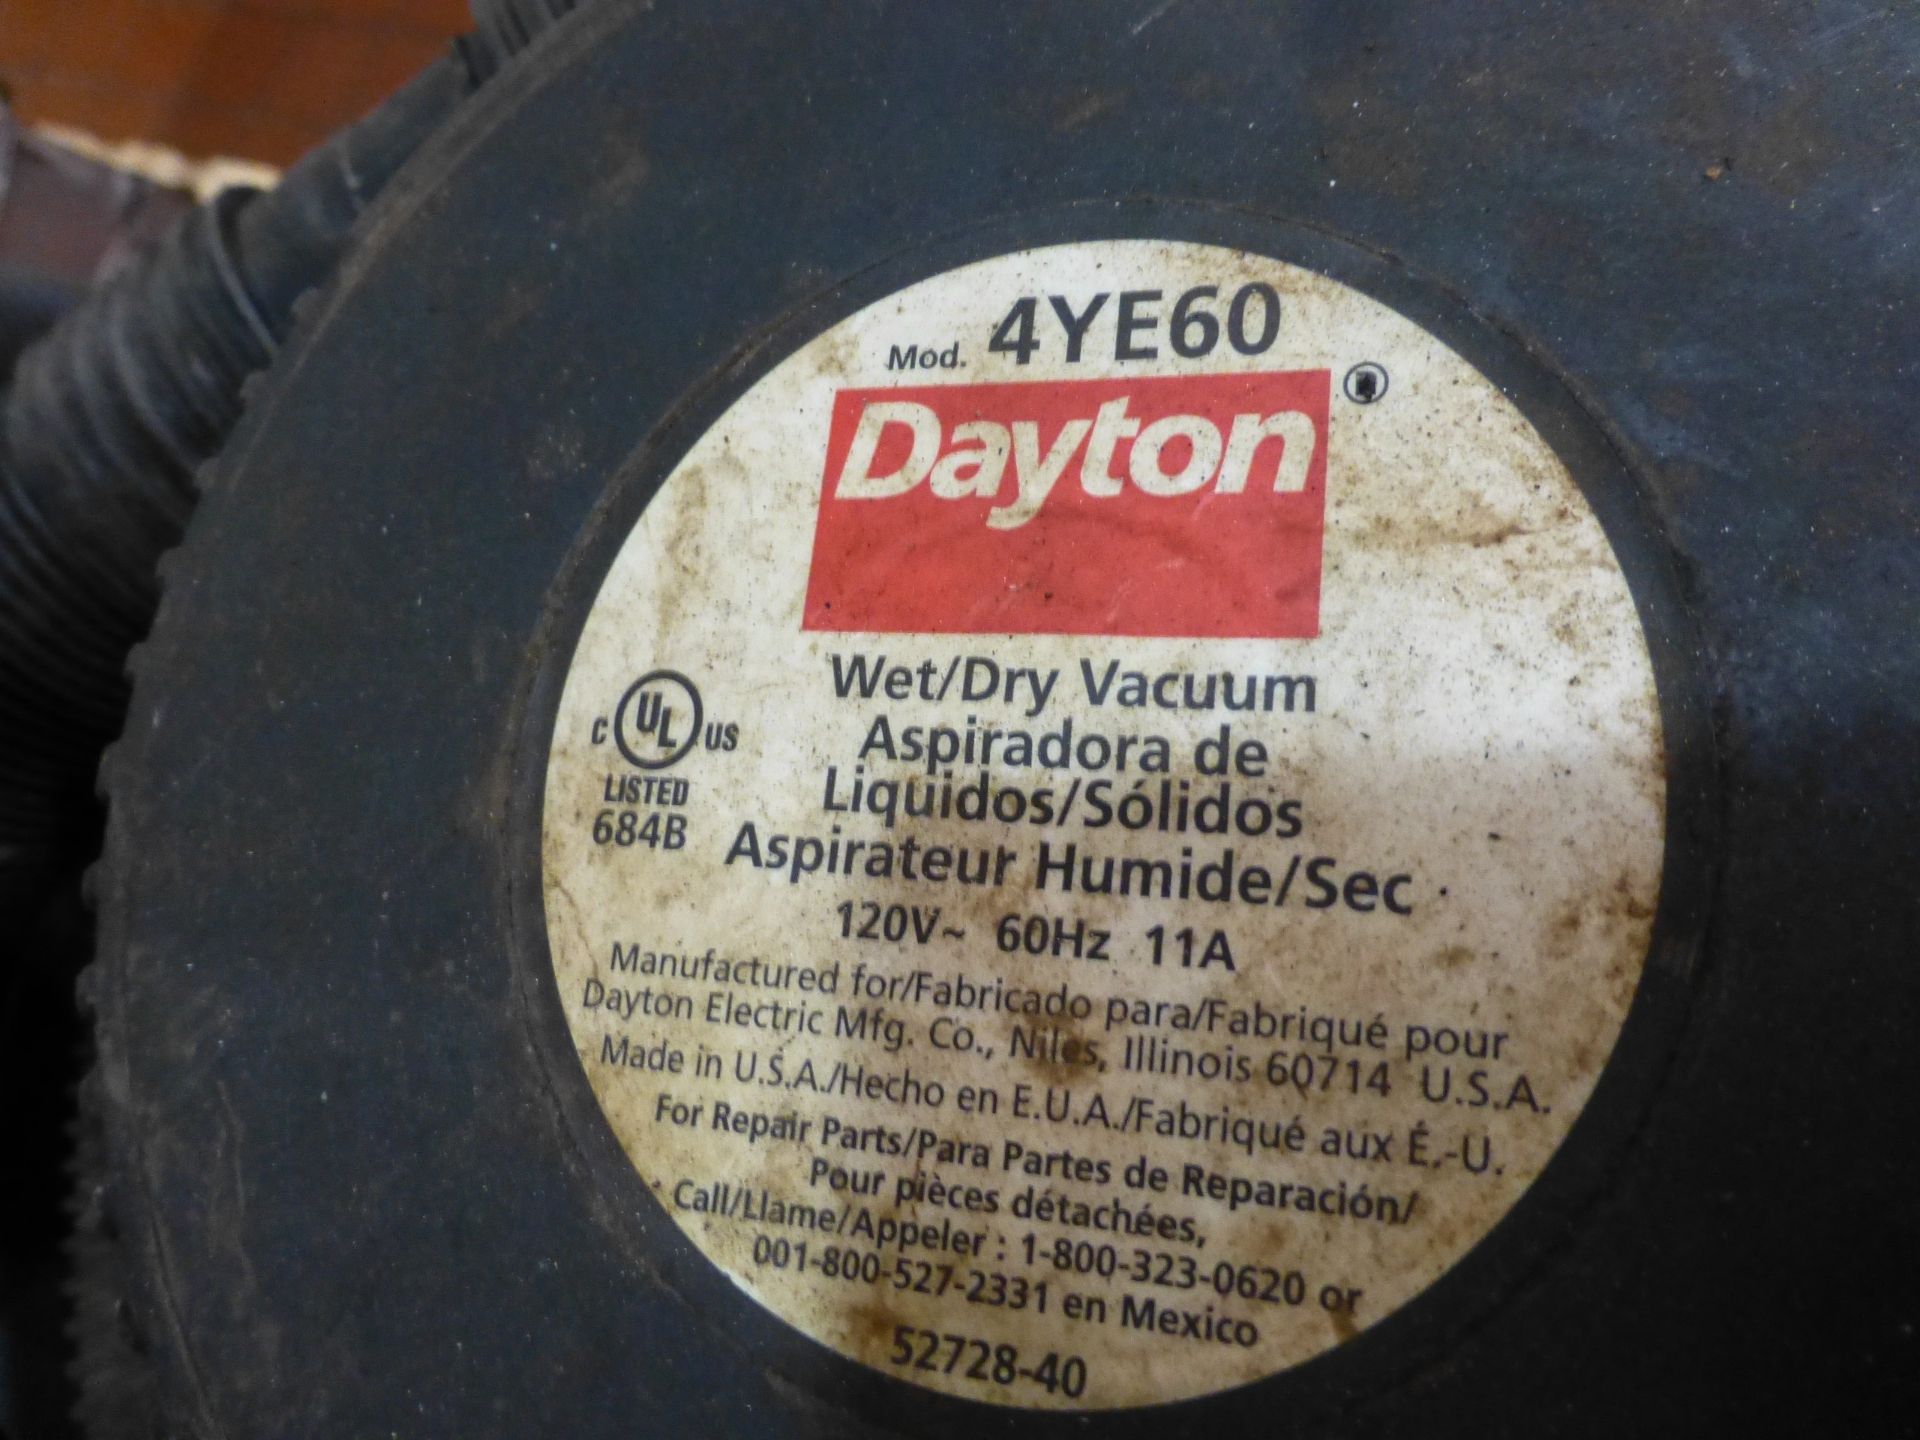 Dayton 55 Gallon Drum Wet/Dry Vacuum w/Casters - Tag 49139 - Image 3 of 3